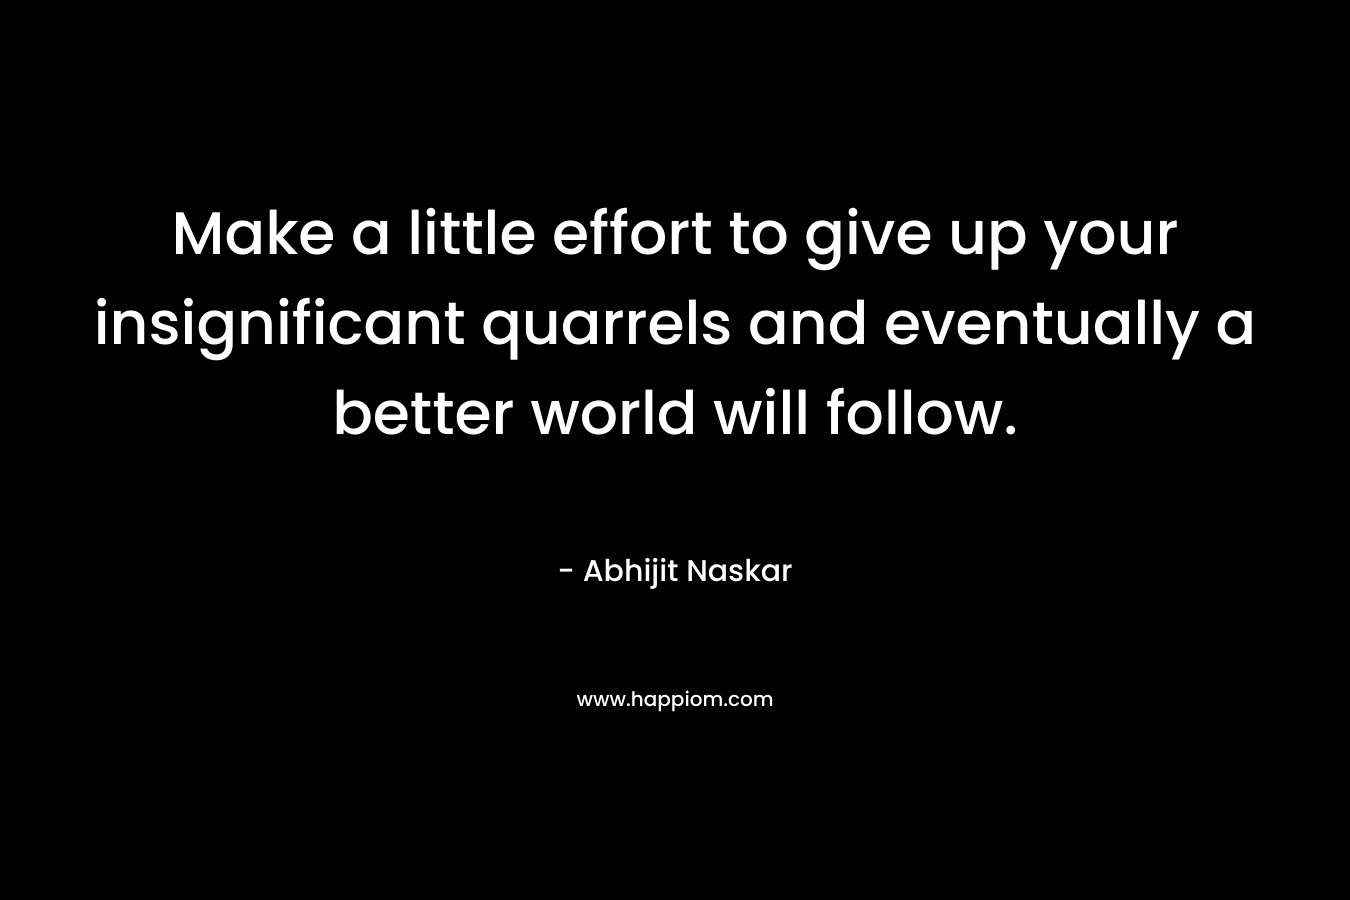 Make a little effort to give up your insignificant quarrels and eventually a better world will follow. – Abhijit Naskar